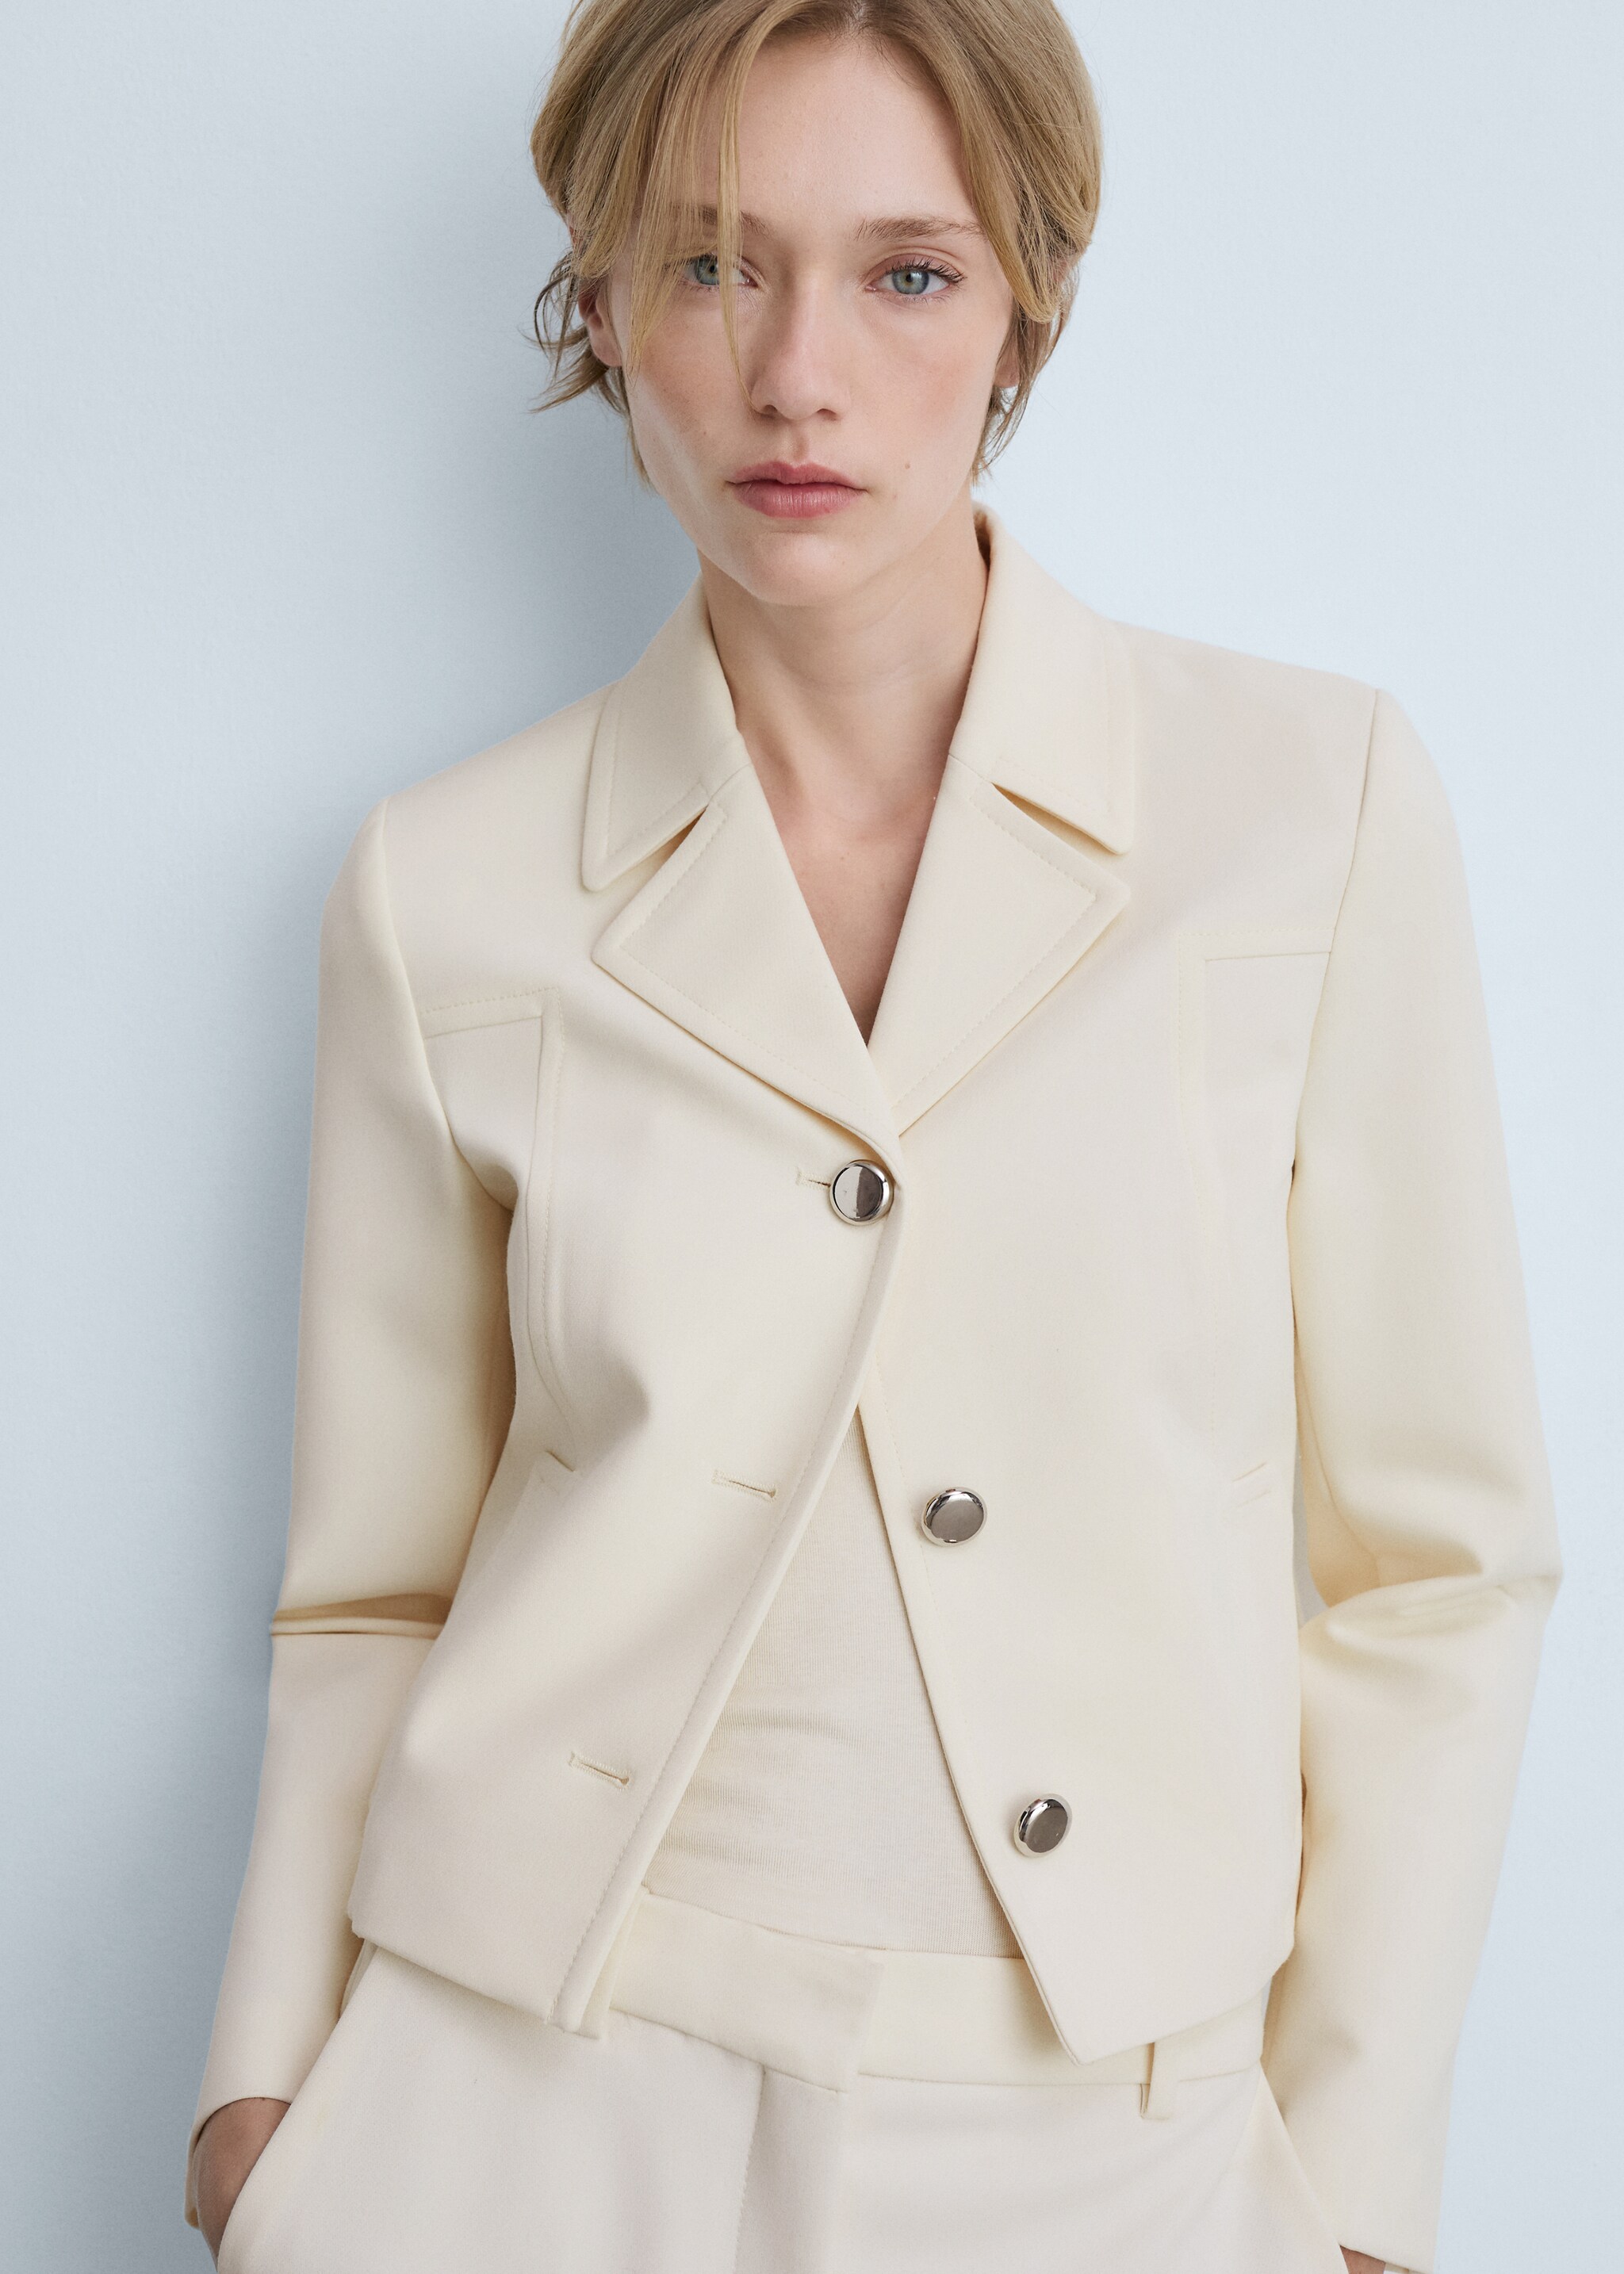 Jacket with lapels and metal buttons - Medium plane